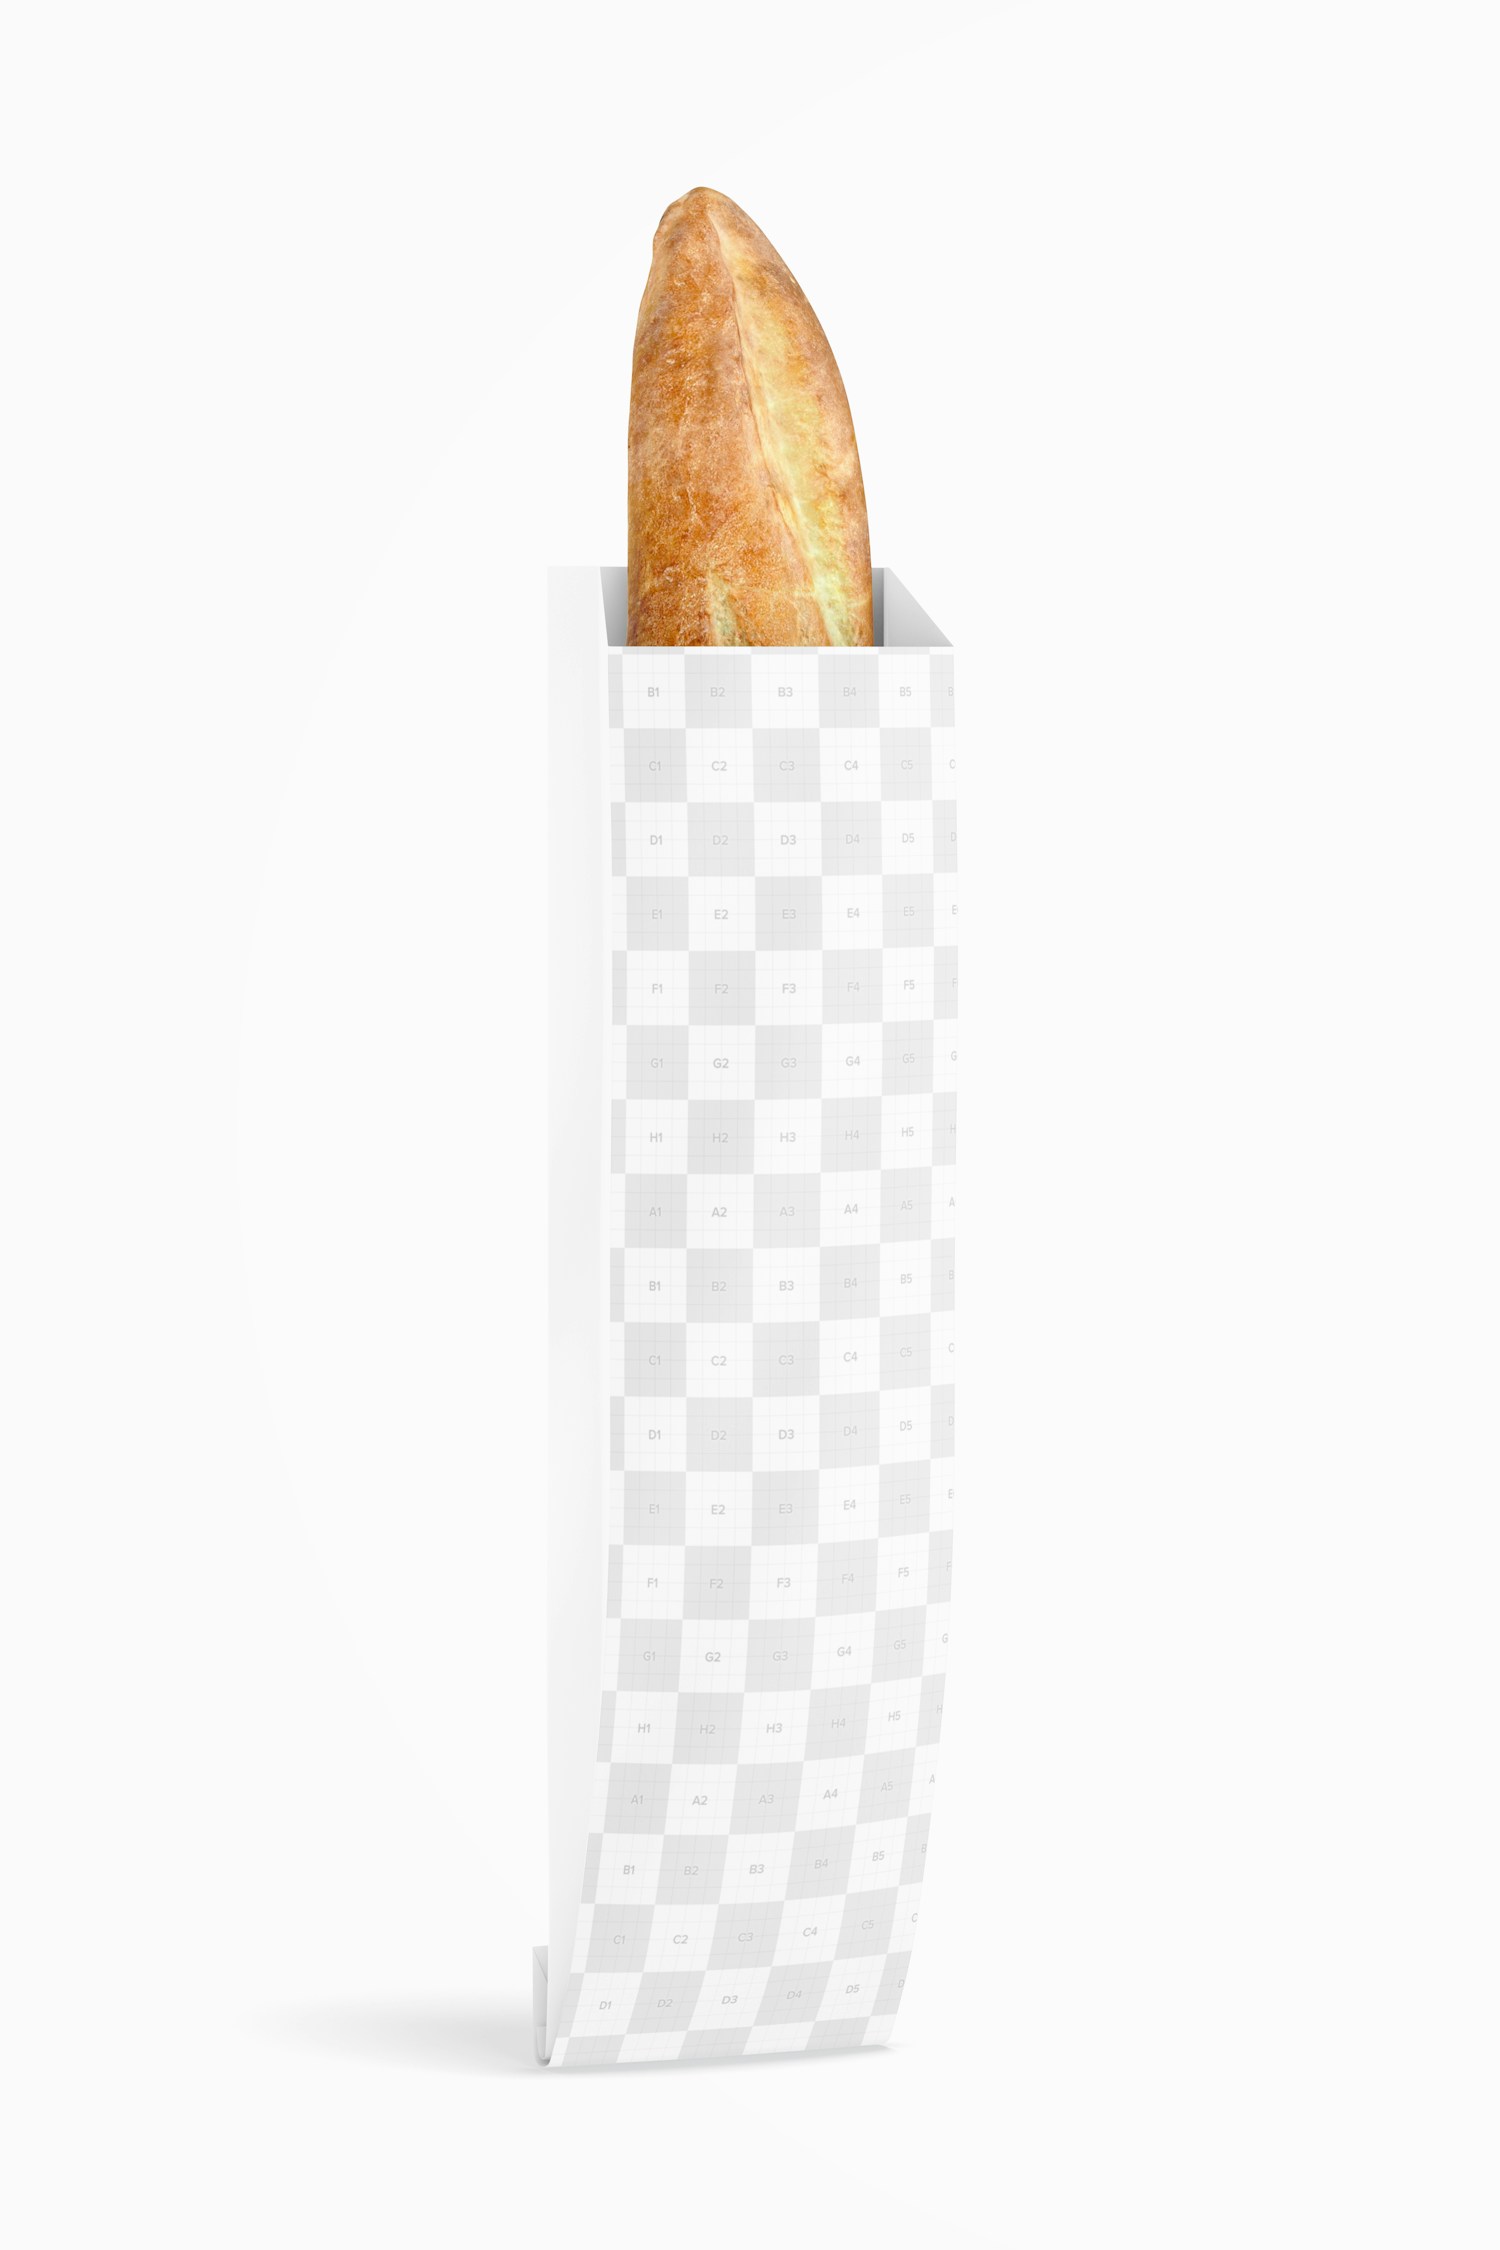 French Bread Paper Bag Mockup, Standing